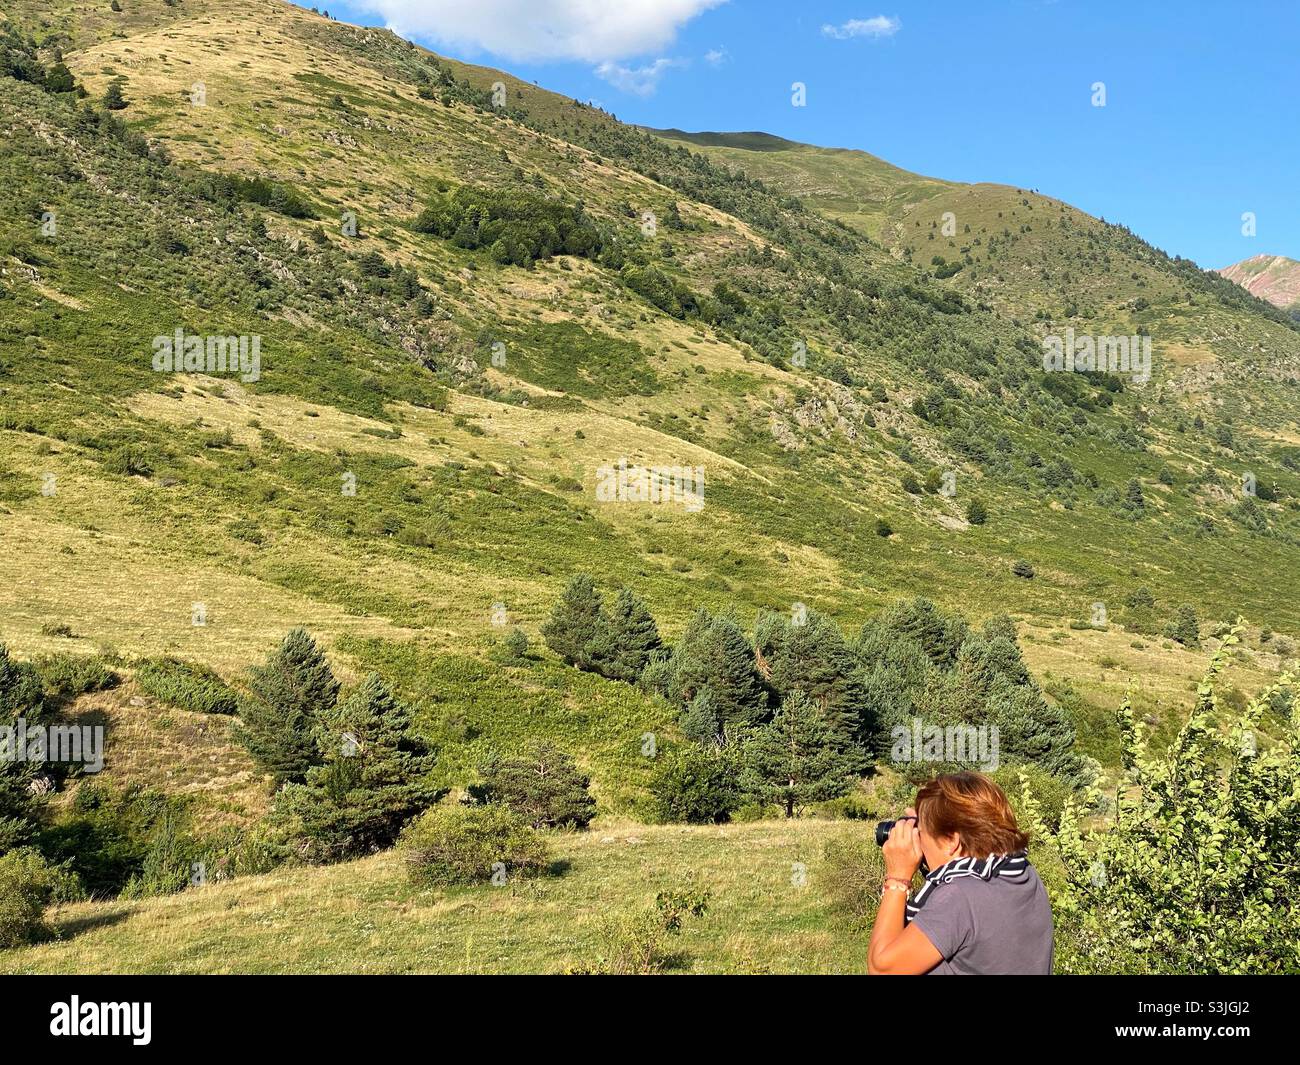 Profile of a woman photographing a mountain Stock Photo